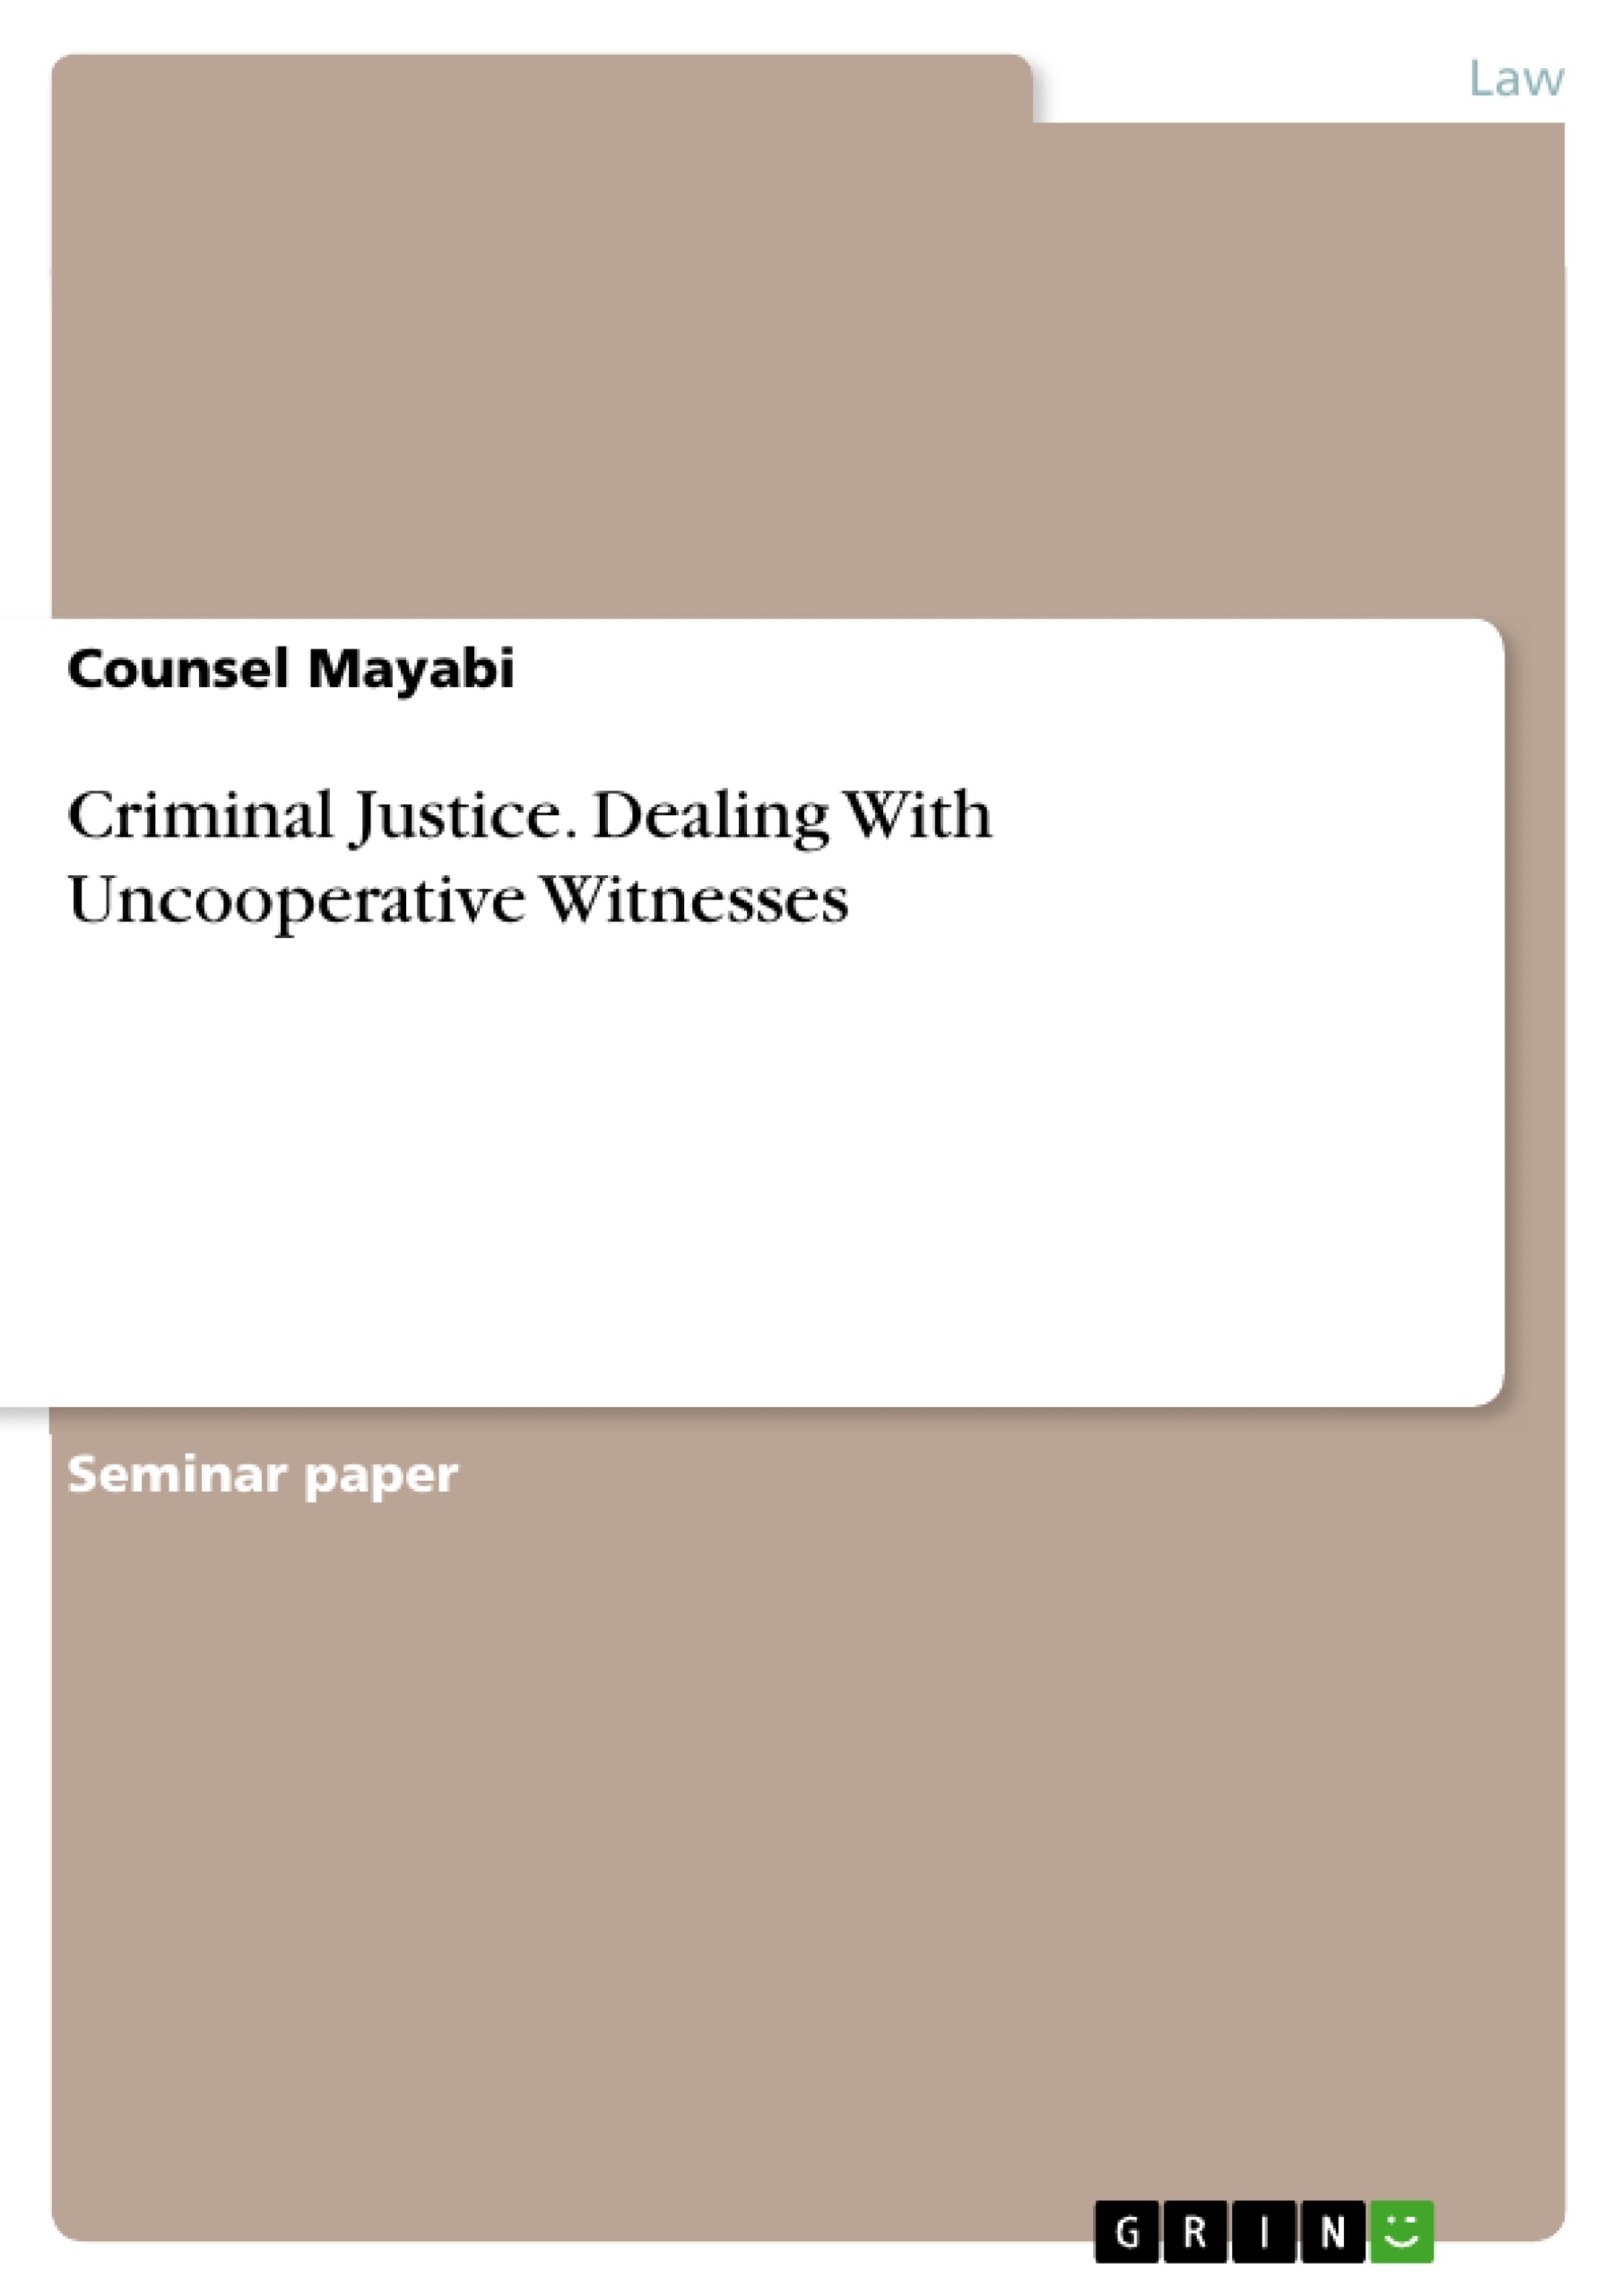 Title: Criminal Justice. Dealing With Uncooperative Witnesses